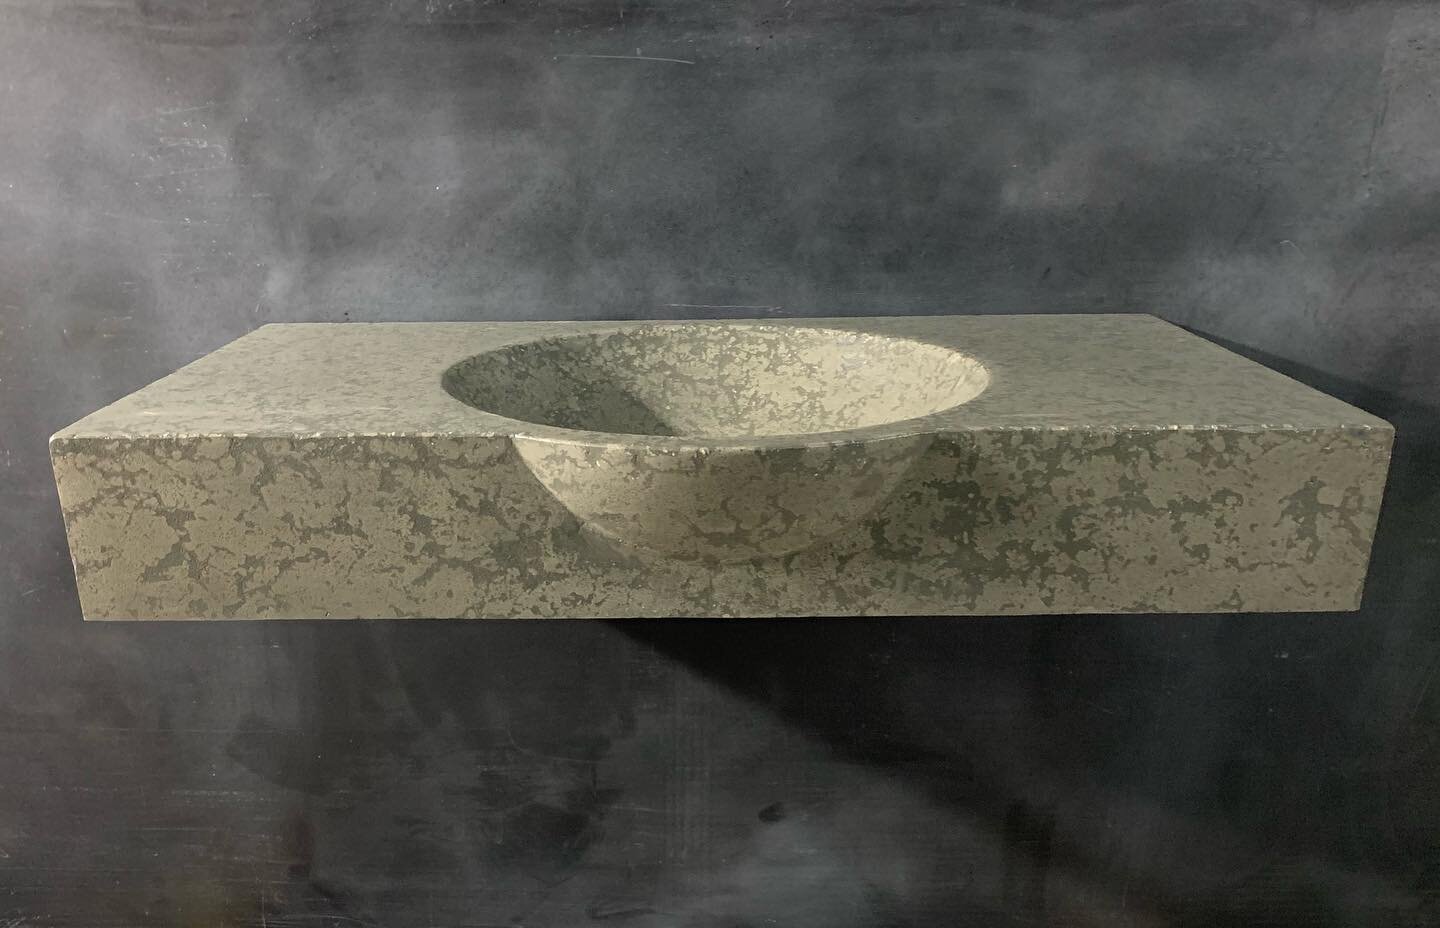 Wish we were keeping this one for ourselves! Hand packed concrete integral bowl vanity #custom #customsink #sinkdesign #concretesink #concretebasin #concretevanity #modernbathroom #modernbathrooms #concretebathroom #bathroomlove #bathroomdesign #conc